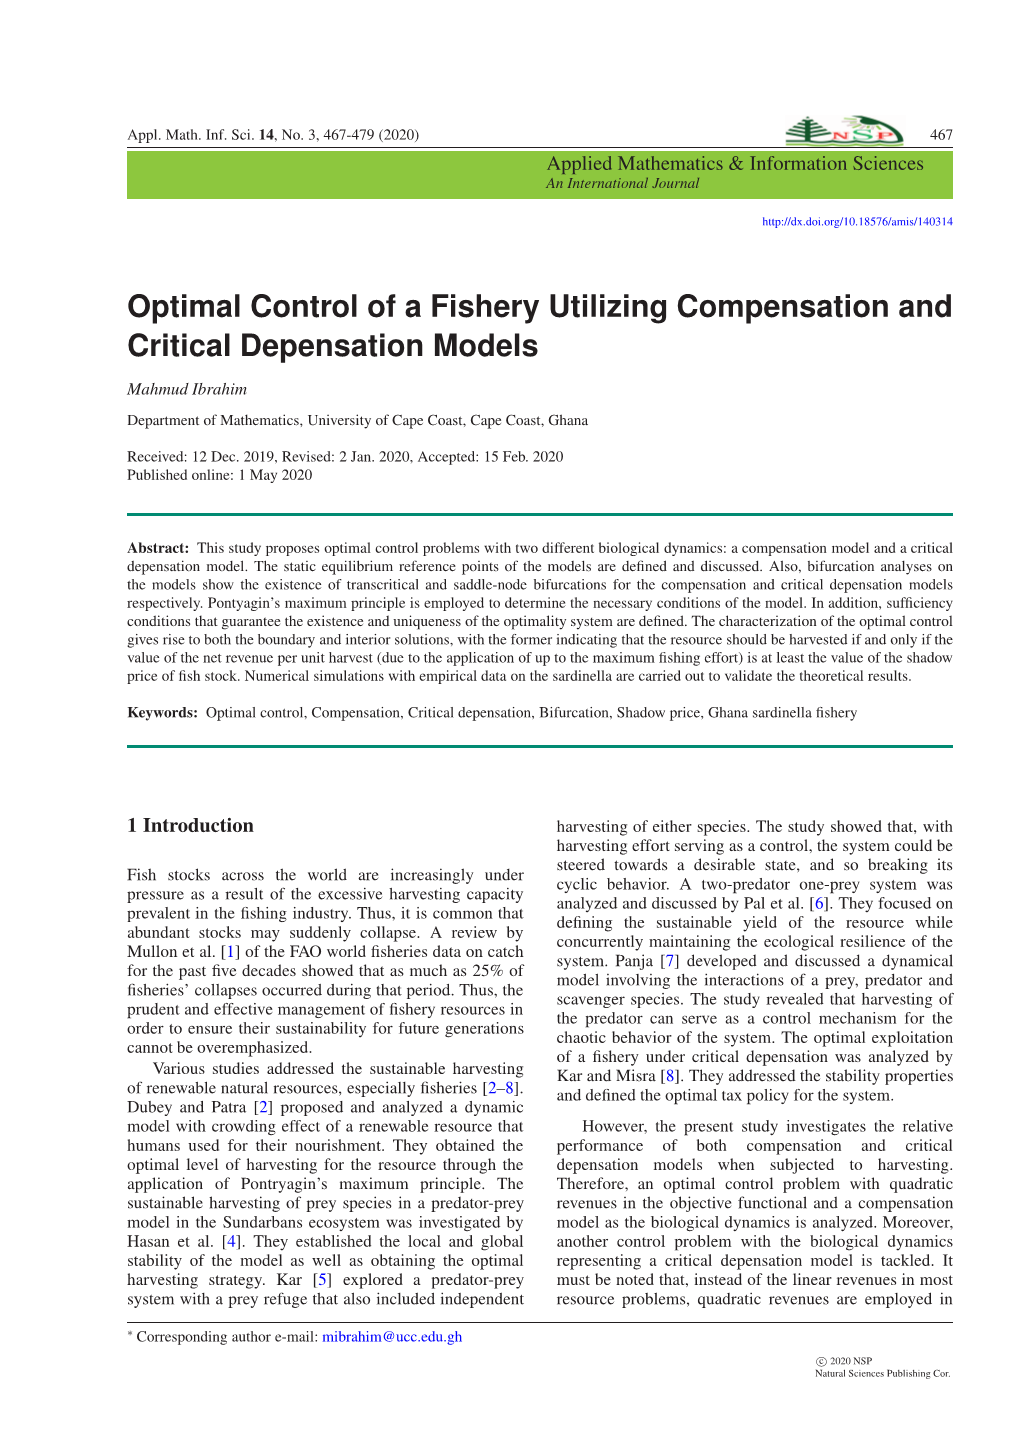 Optimal Control of a Fishery Utilizing Compensation and Critical Depensation Models